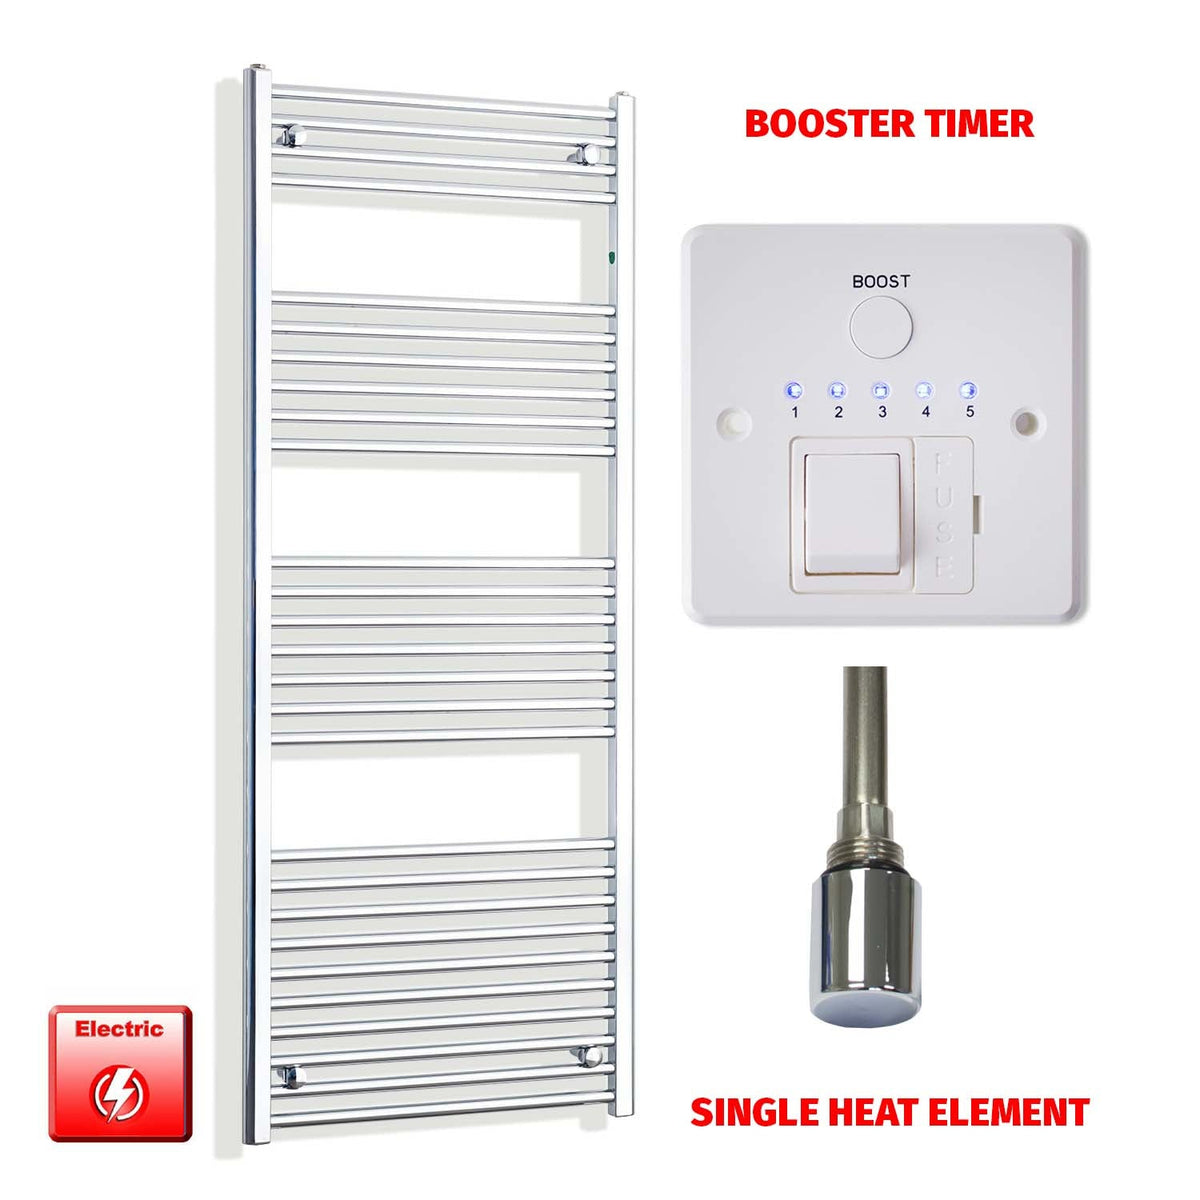 1600mm High 500mm Wide Pre-Filled Electric Heated Towel Radiator Straight or Curved Chrome Single heat element Booster timer